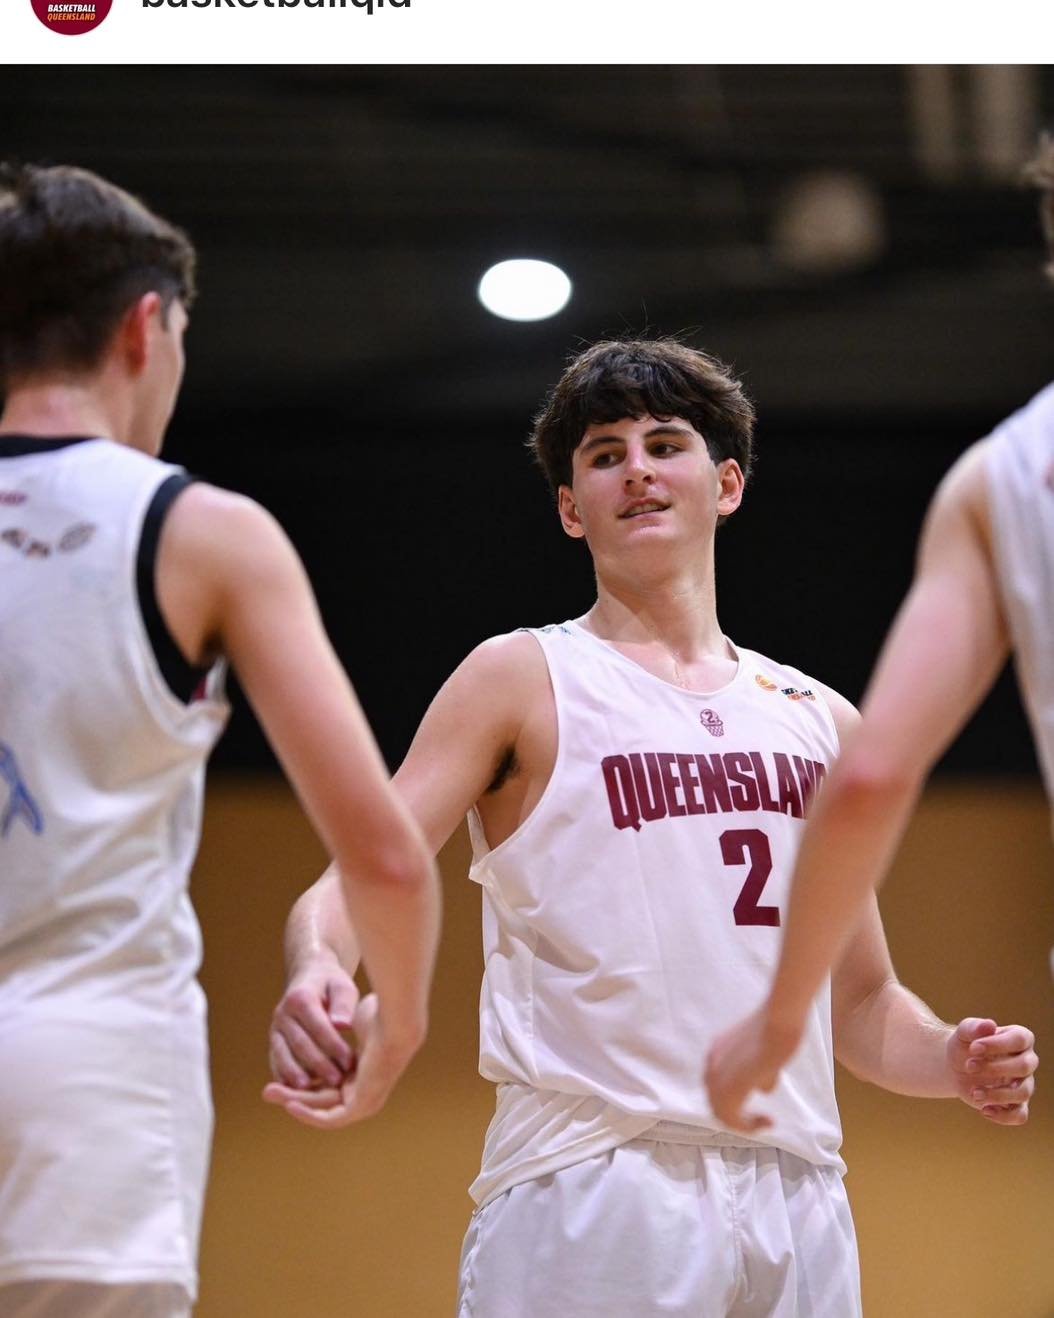 SHINING STAR! 🌟 

Shout out to Vipers star Brodie McGregor who is currently representing QLD South at the u18 Men&rsquo;s National Championships being held in Brisbane. Let&rsquo;s go B-Mac!!! 🤩🏀